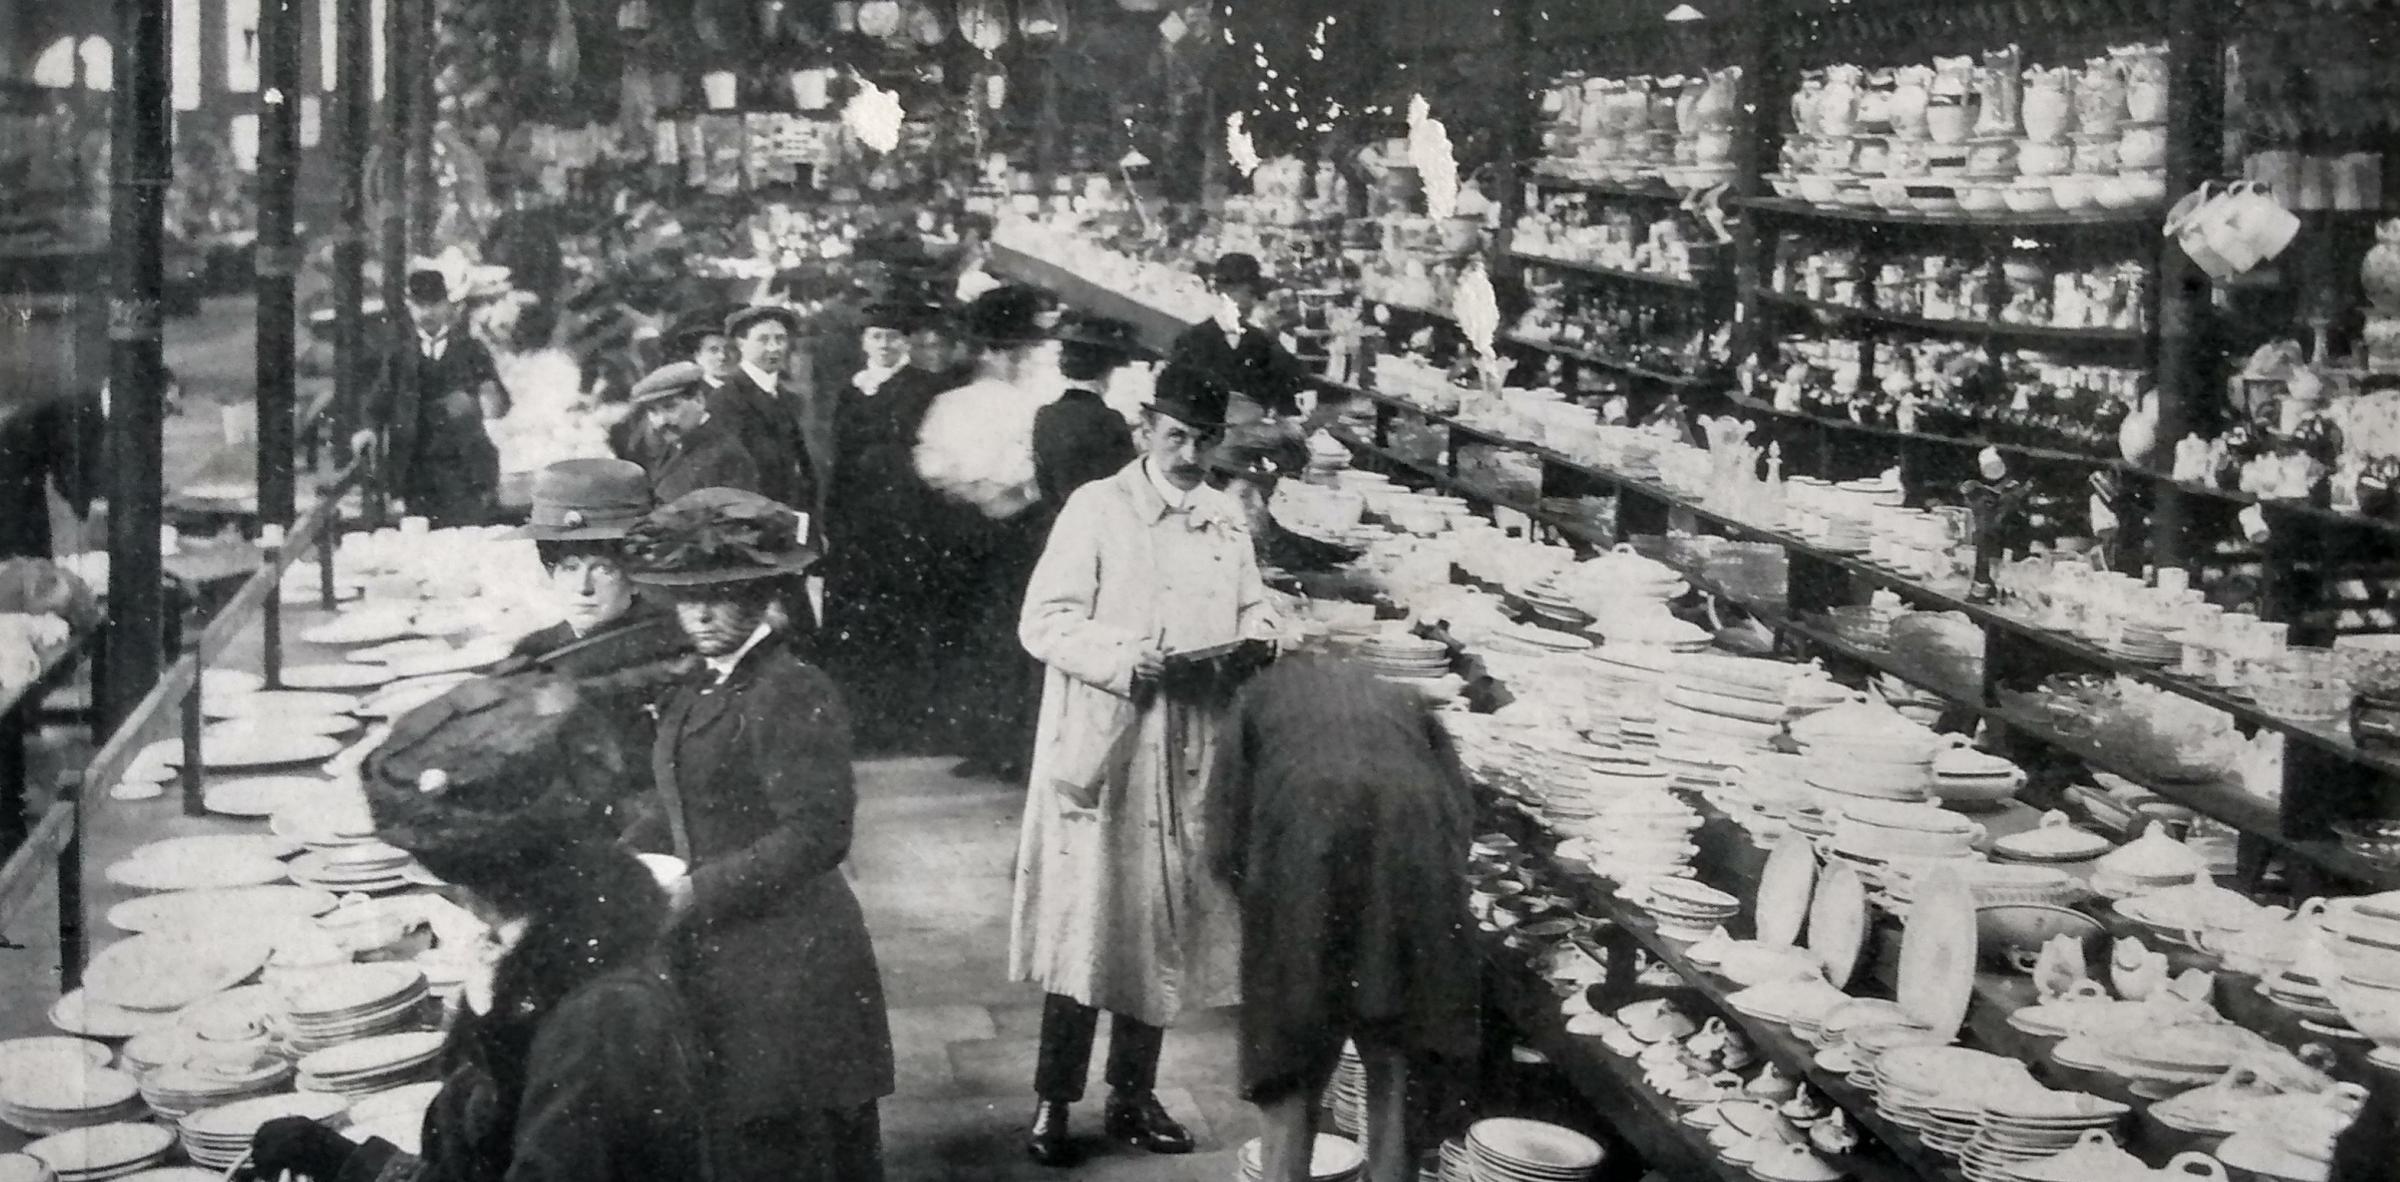 A sale of china at Sigleys china stores in Market Hall